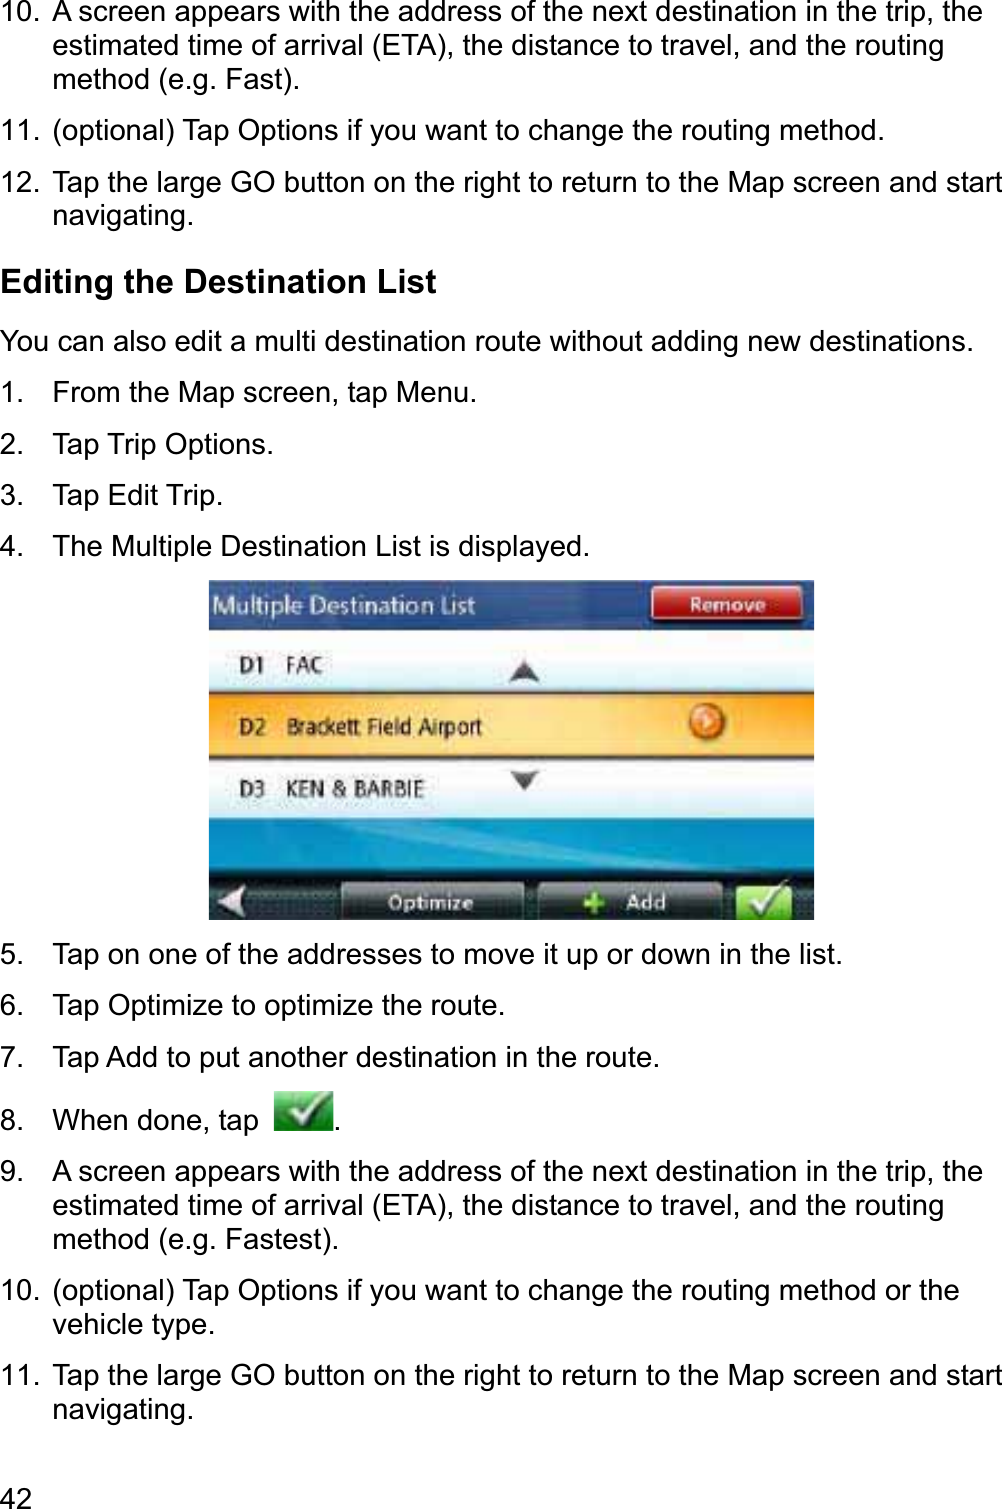 4210.  A screen appears with the address of the next destination in the trip, the estimated time of arrival (ETA), the distance to travel, and the routing method (e.g. Fast). 11.  (optional) Tap Options if you want to change the routing method. 12.  Tap the large GO button on the right to return to the Map screen and start navigating.Editing the Destination List You can also edit a multi destination route without adding new destinations. 1.  From the Map screen, tap Menu. 2. Tap Trip Options. 3. Tap Edit Trip. 4.  The Multiple Destination List is displayed. 5.  Tap on one of the addresses to move it up or down in the list. 6.  Tap Optimize to optimize the route. 7.  Tap Add to put another destination in the route. 8.  When done, tap  .9.  A screen appears with the address of the next destination in the trip, the estimated time of arrival (ETA), the distance to travel, and the routing method (e.g. Fastest). 10.  (optional) Tap Options if you want to change the routing method or the vehicle type. 11.  Tap the large GO button on the right to return to the Map screen and start navigating.